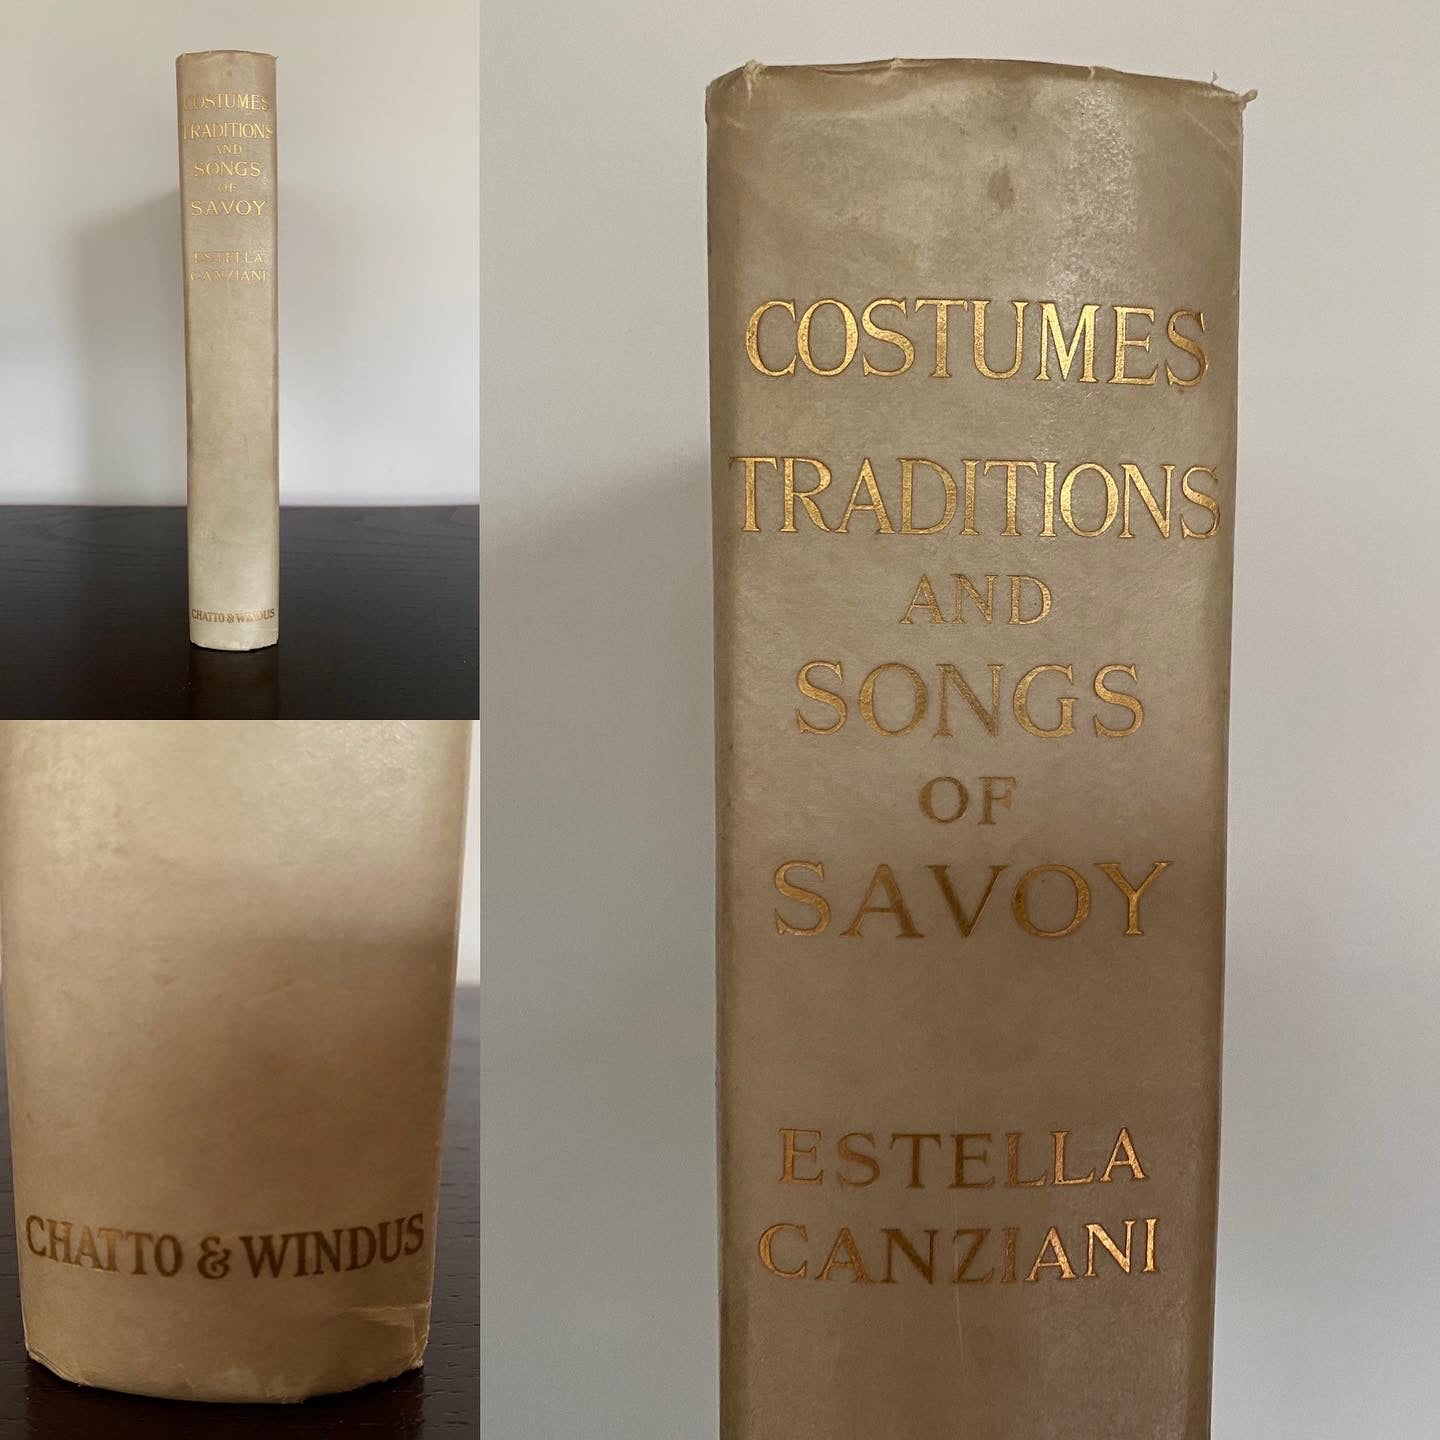 CANZIANI, Estella (1887–1964). Costumes Traditions and Sons of Savoy. London: Chatto & Windus, 1911.